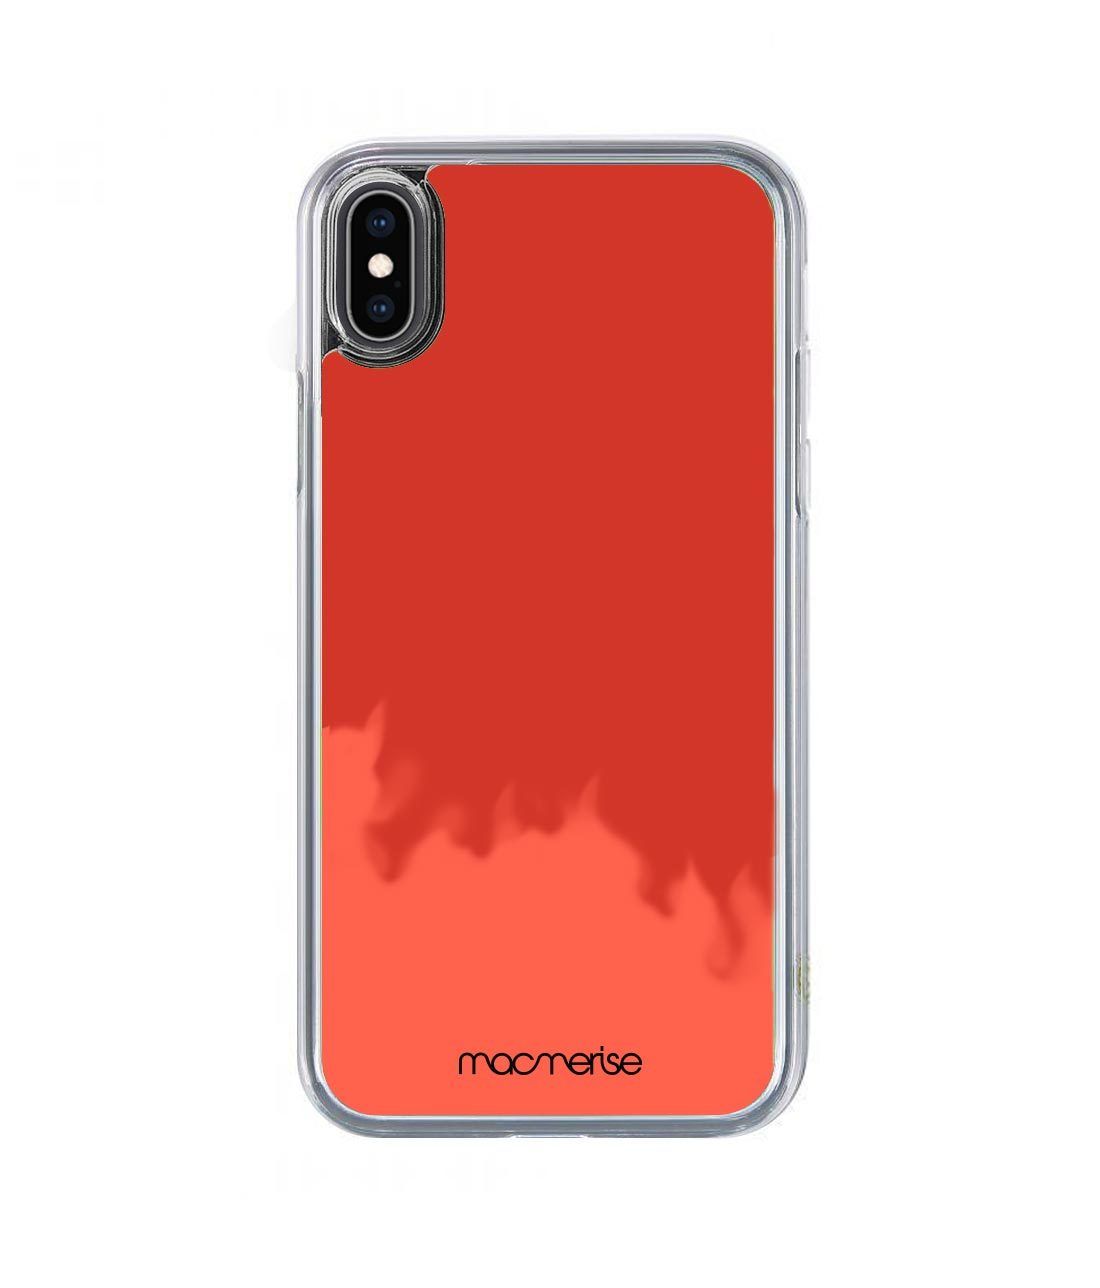 Neon Sand Red - Neon Sand Phone Case for iPhone XS Max